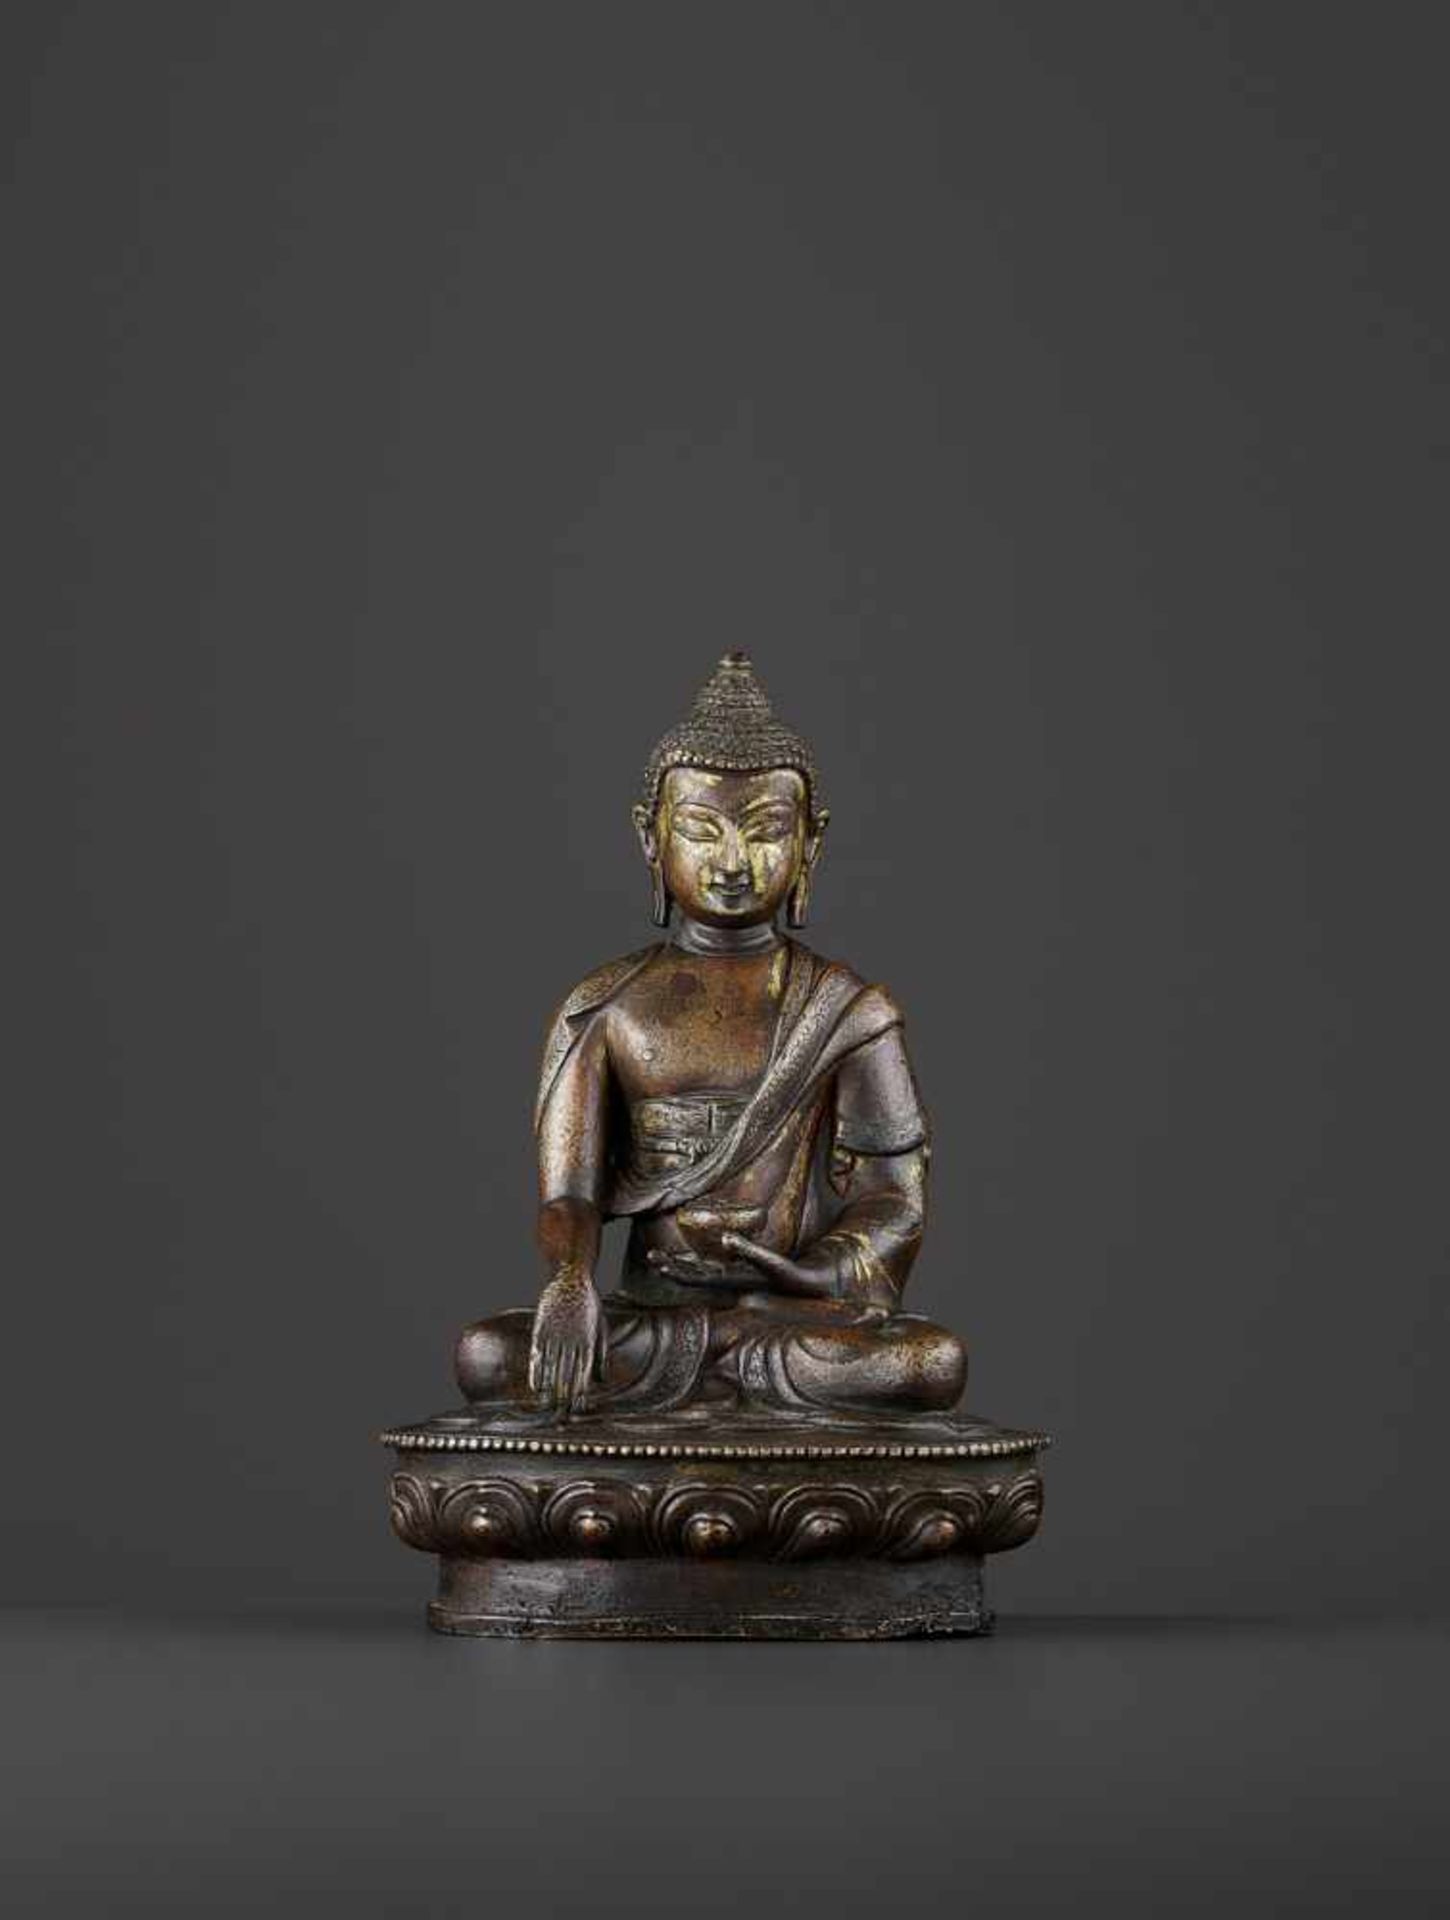 A BRONZE BUDDHA SHAKYMUNI, QING China, 18th century. The figure seated on a beaded lotus base in